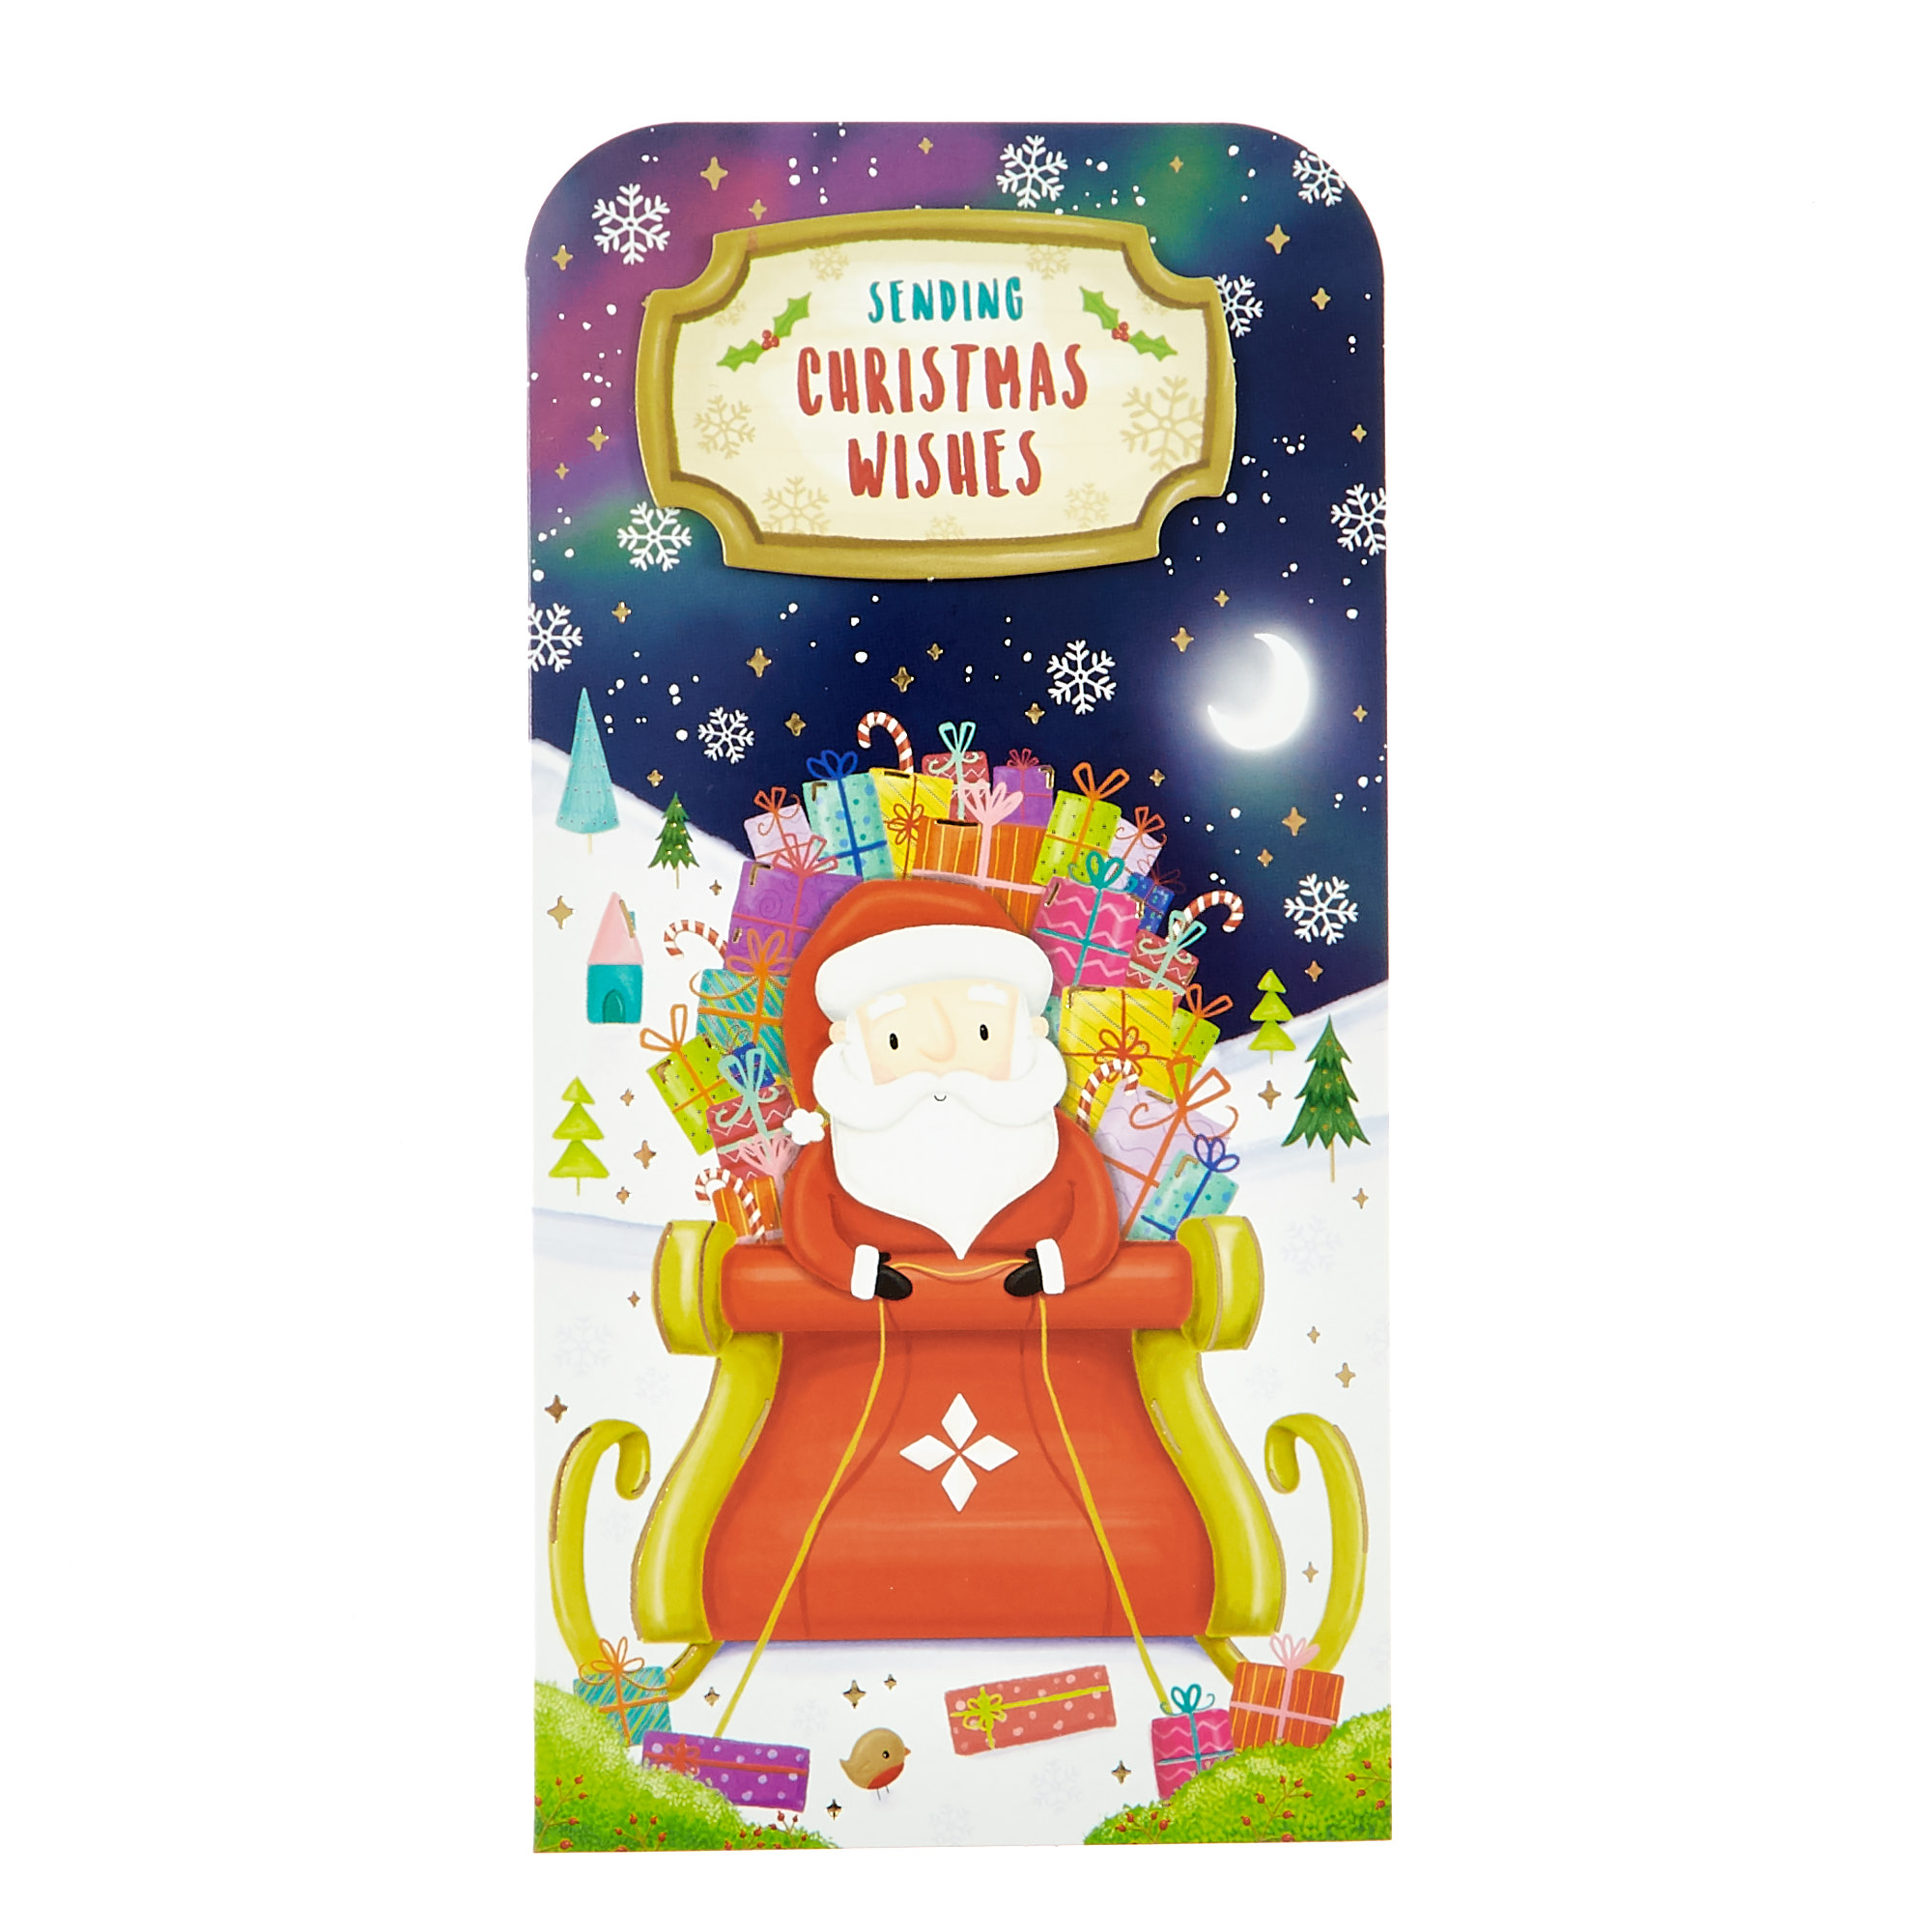 Children's Handcrafted Christmas Money Wallets - Pack of 3